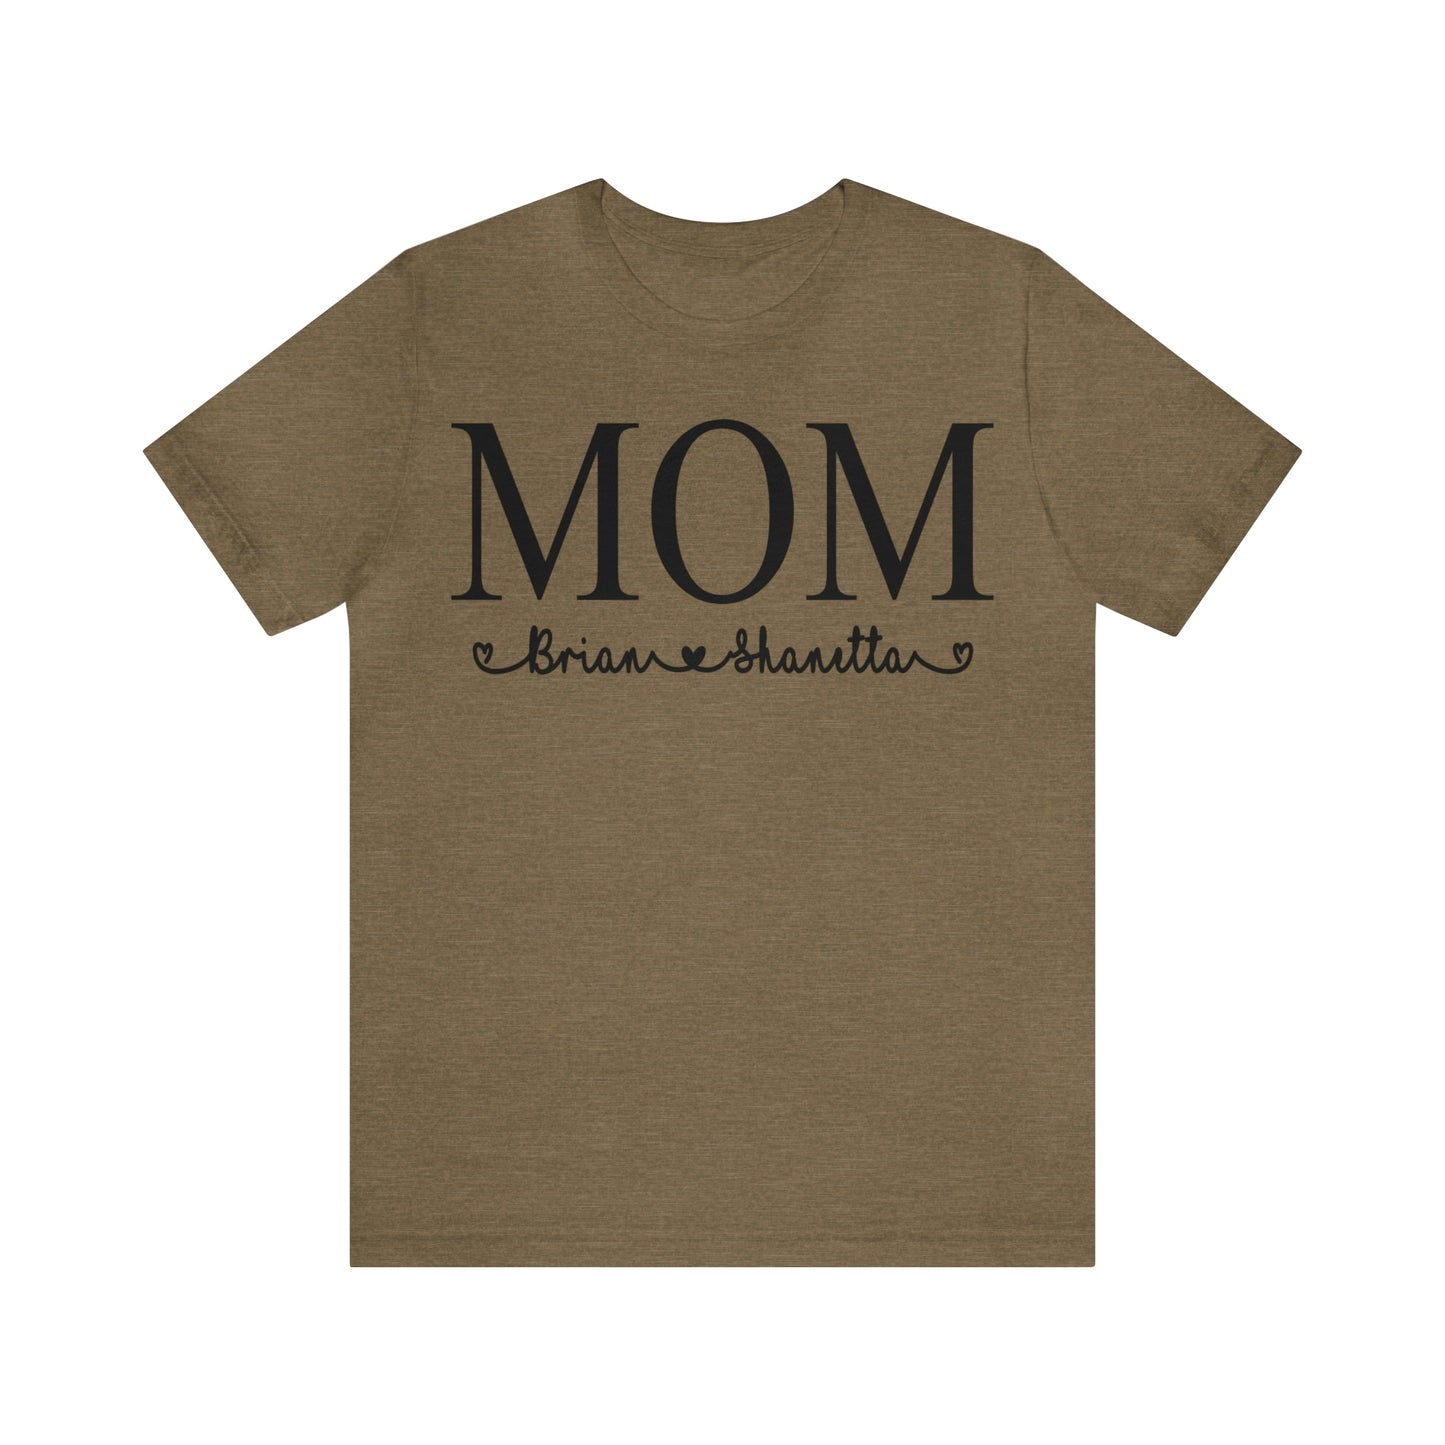 Personalized Mom Shirt with Children's Names